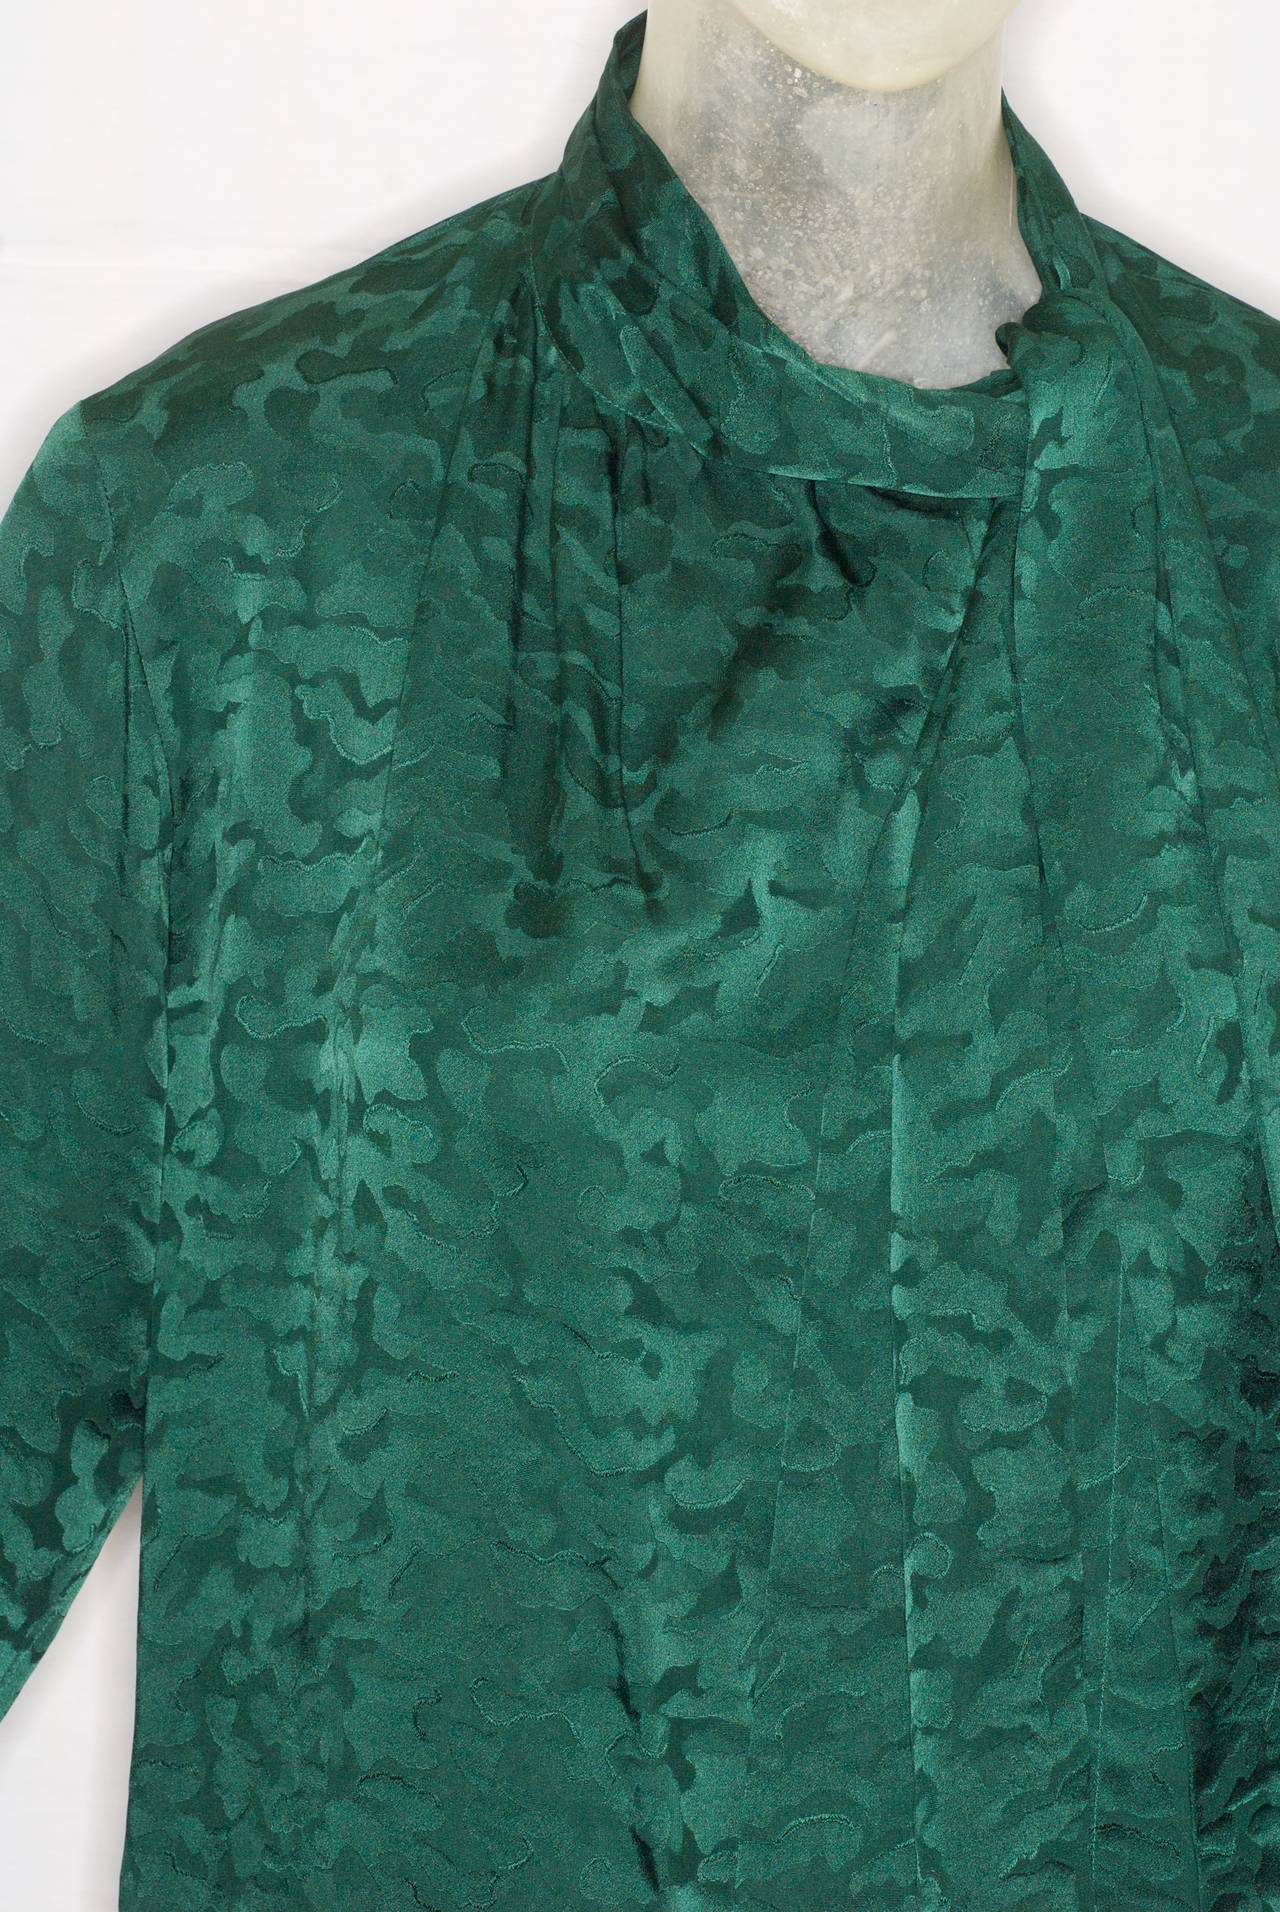 Yves Saint Laurent's silk pussy-bow blouse in a leopard print is a timeless classic.

Size 36 - but fits more like a 38.

Excellent condition.